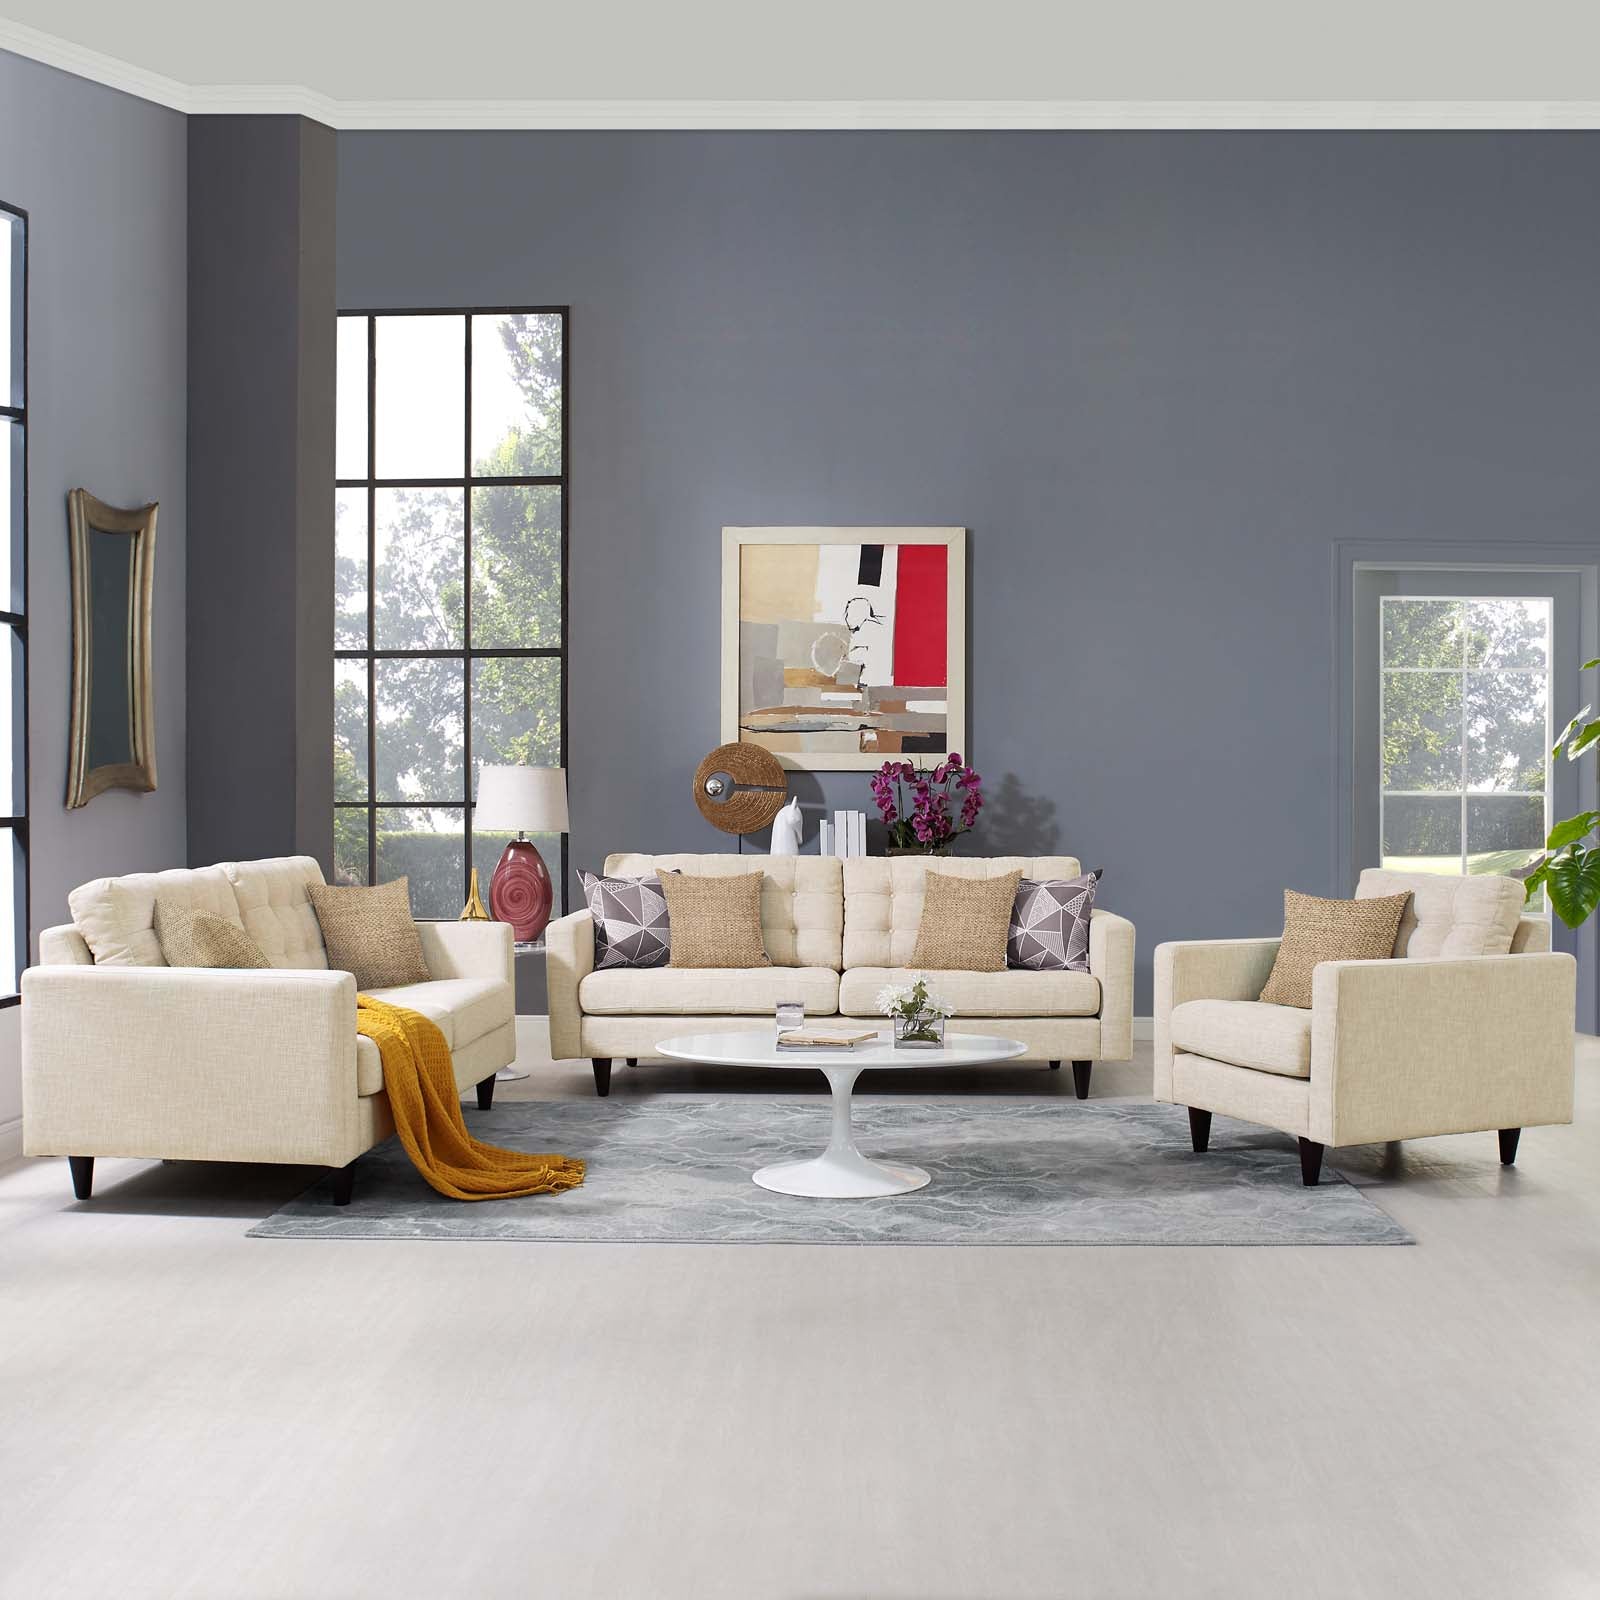 Modway Living Room Sets - Empress Sofa, Loveseat And Armchair Set Of 3 Beige